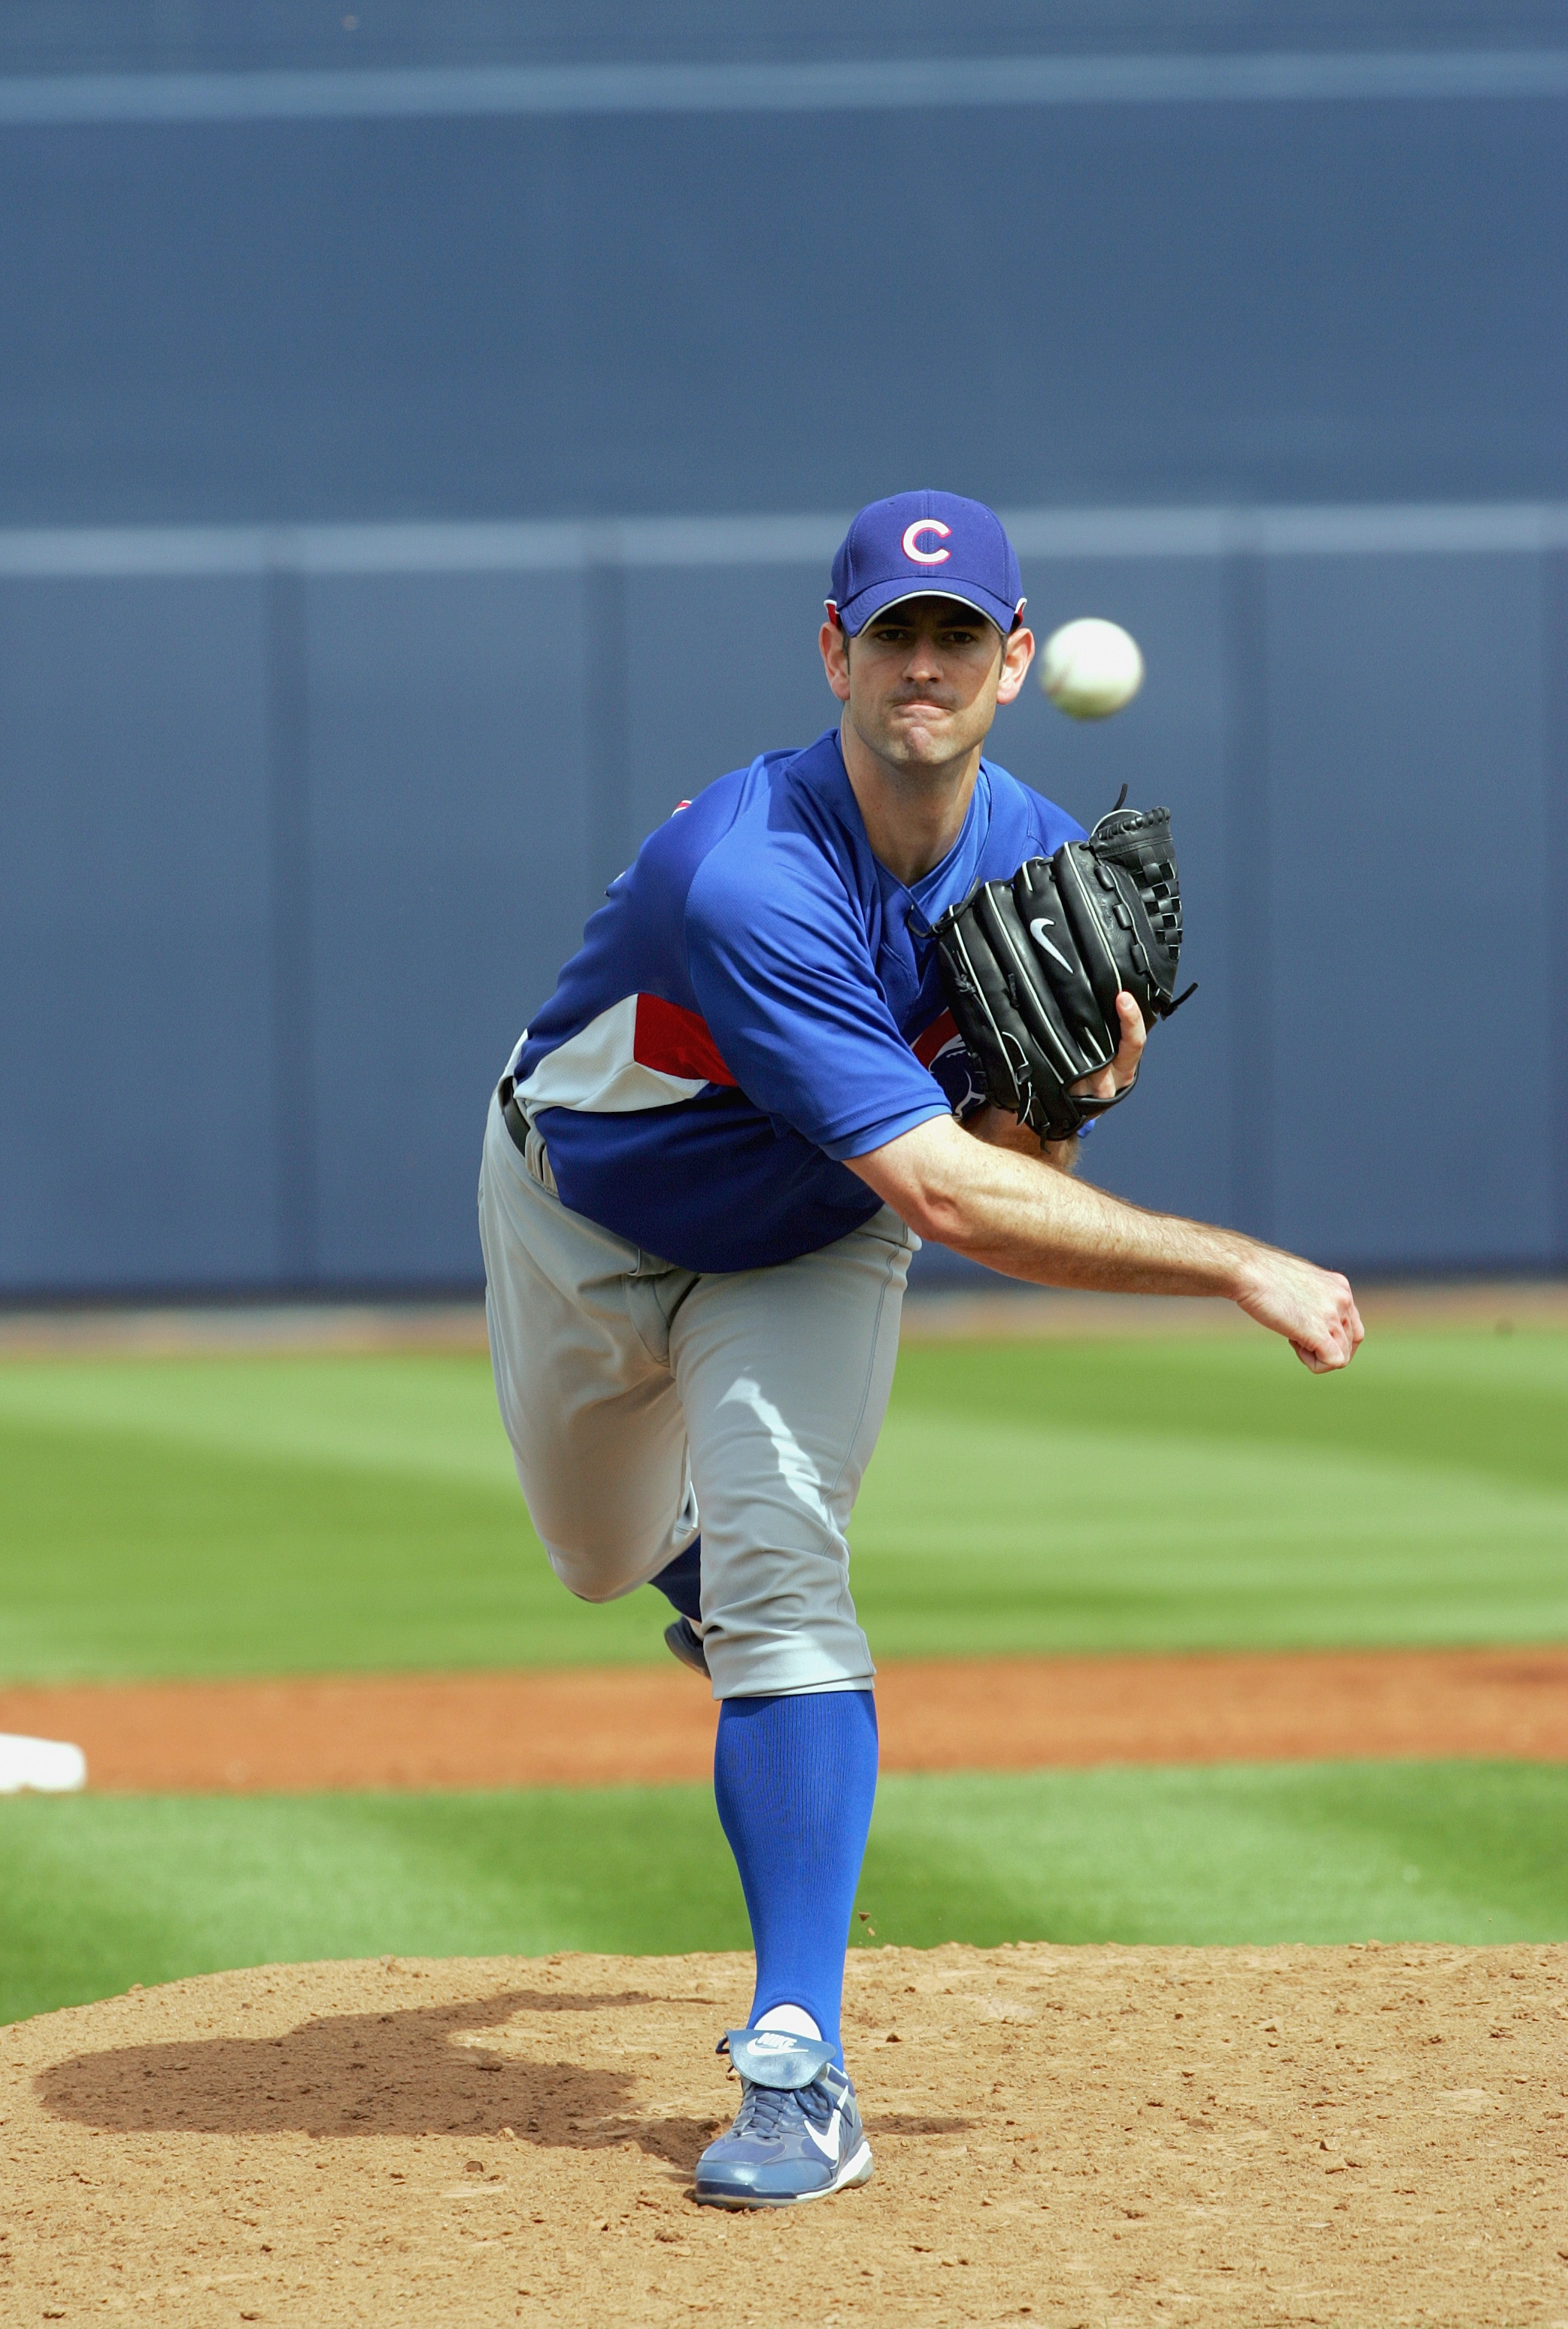 PEORIA, AZ - MARCH 5: Pitcher Mark Prior #22 of the Chicago Cubs pitches during a play against the Seattle Mariners during Spring Training at Peoria Sports Complex March 5, 2007 in Peoria, Arizona. (Photo by Stephen Dunn/Getty Images)